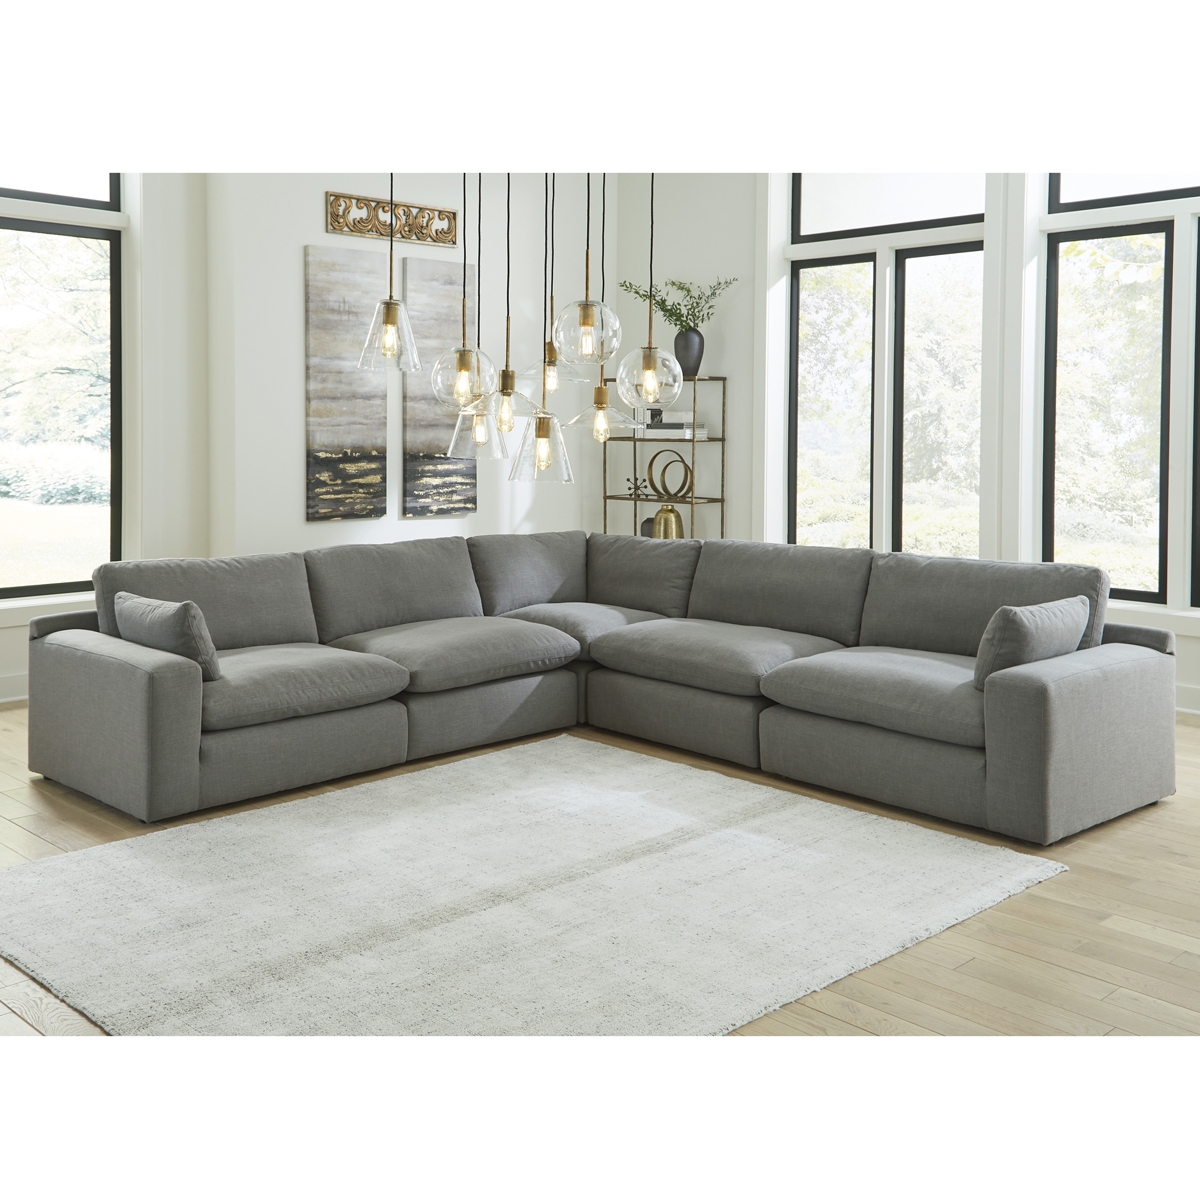 Picture of L.A. SMOKE 5 PC SECTIONAL